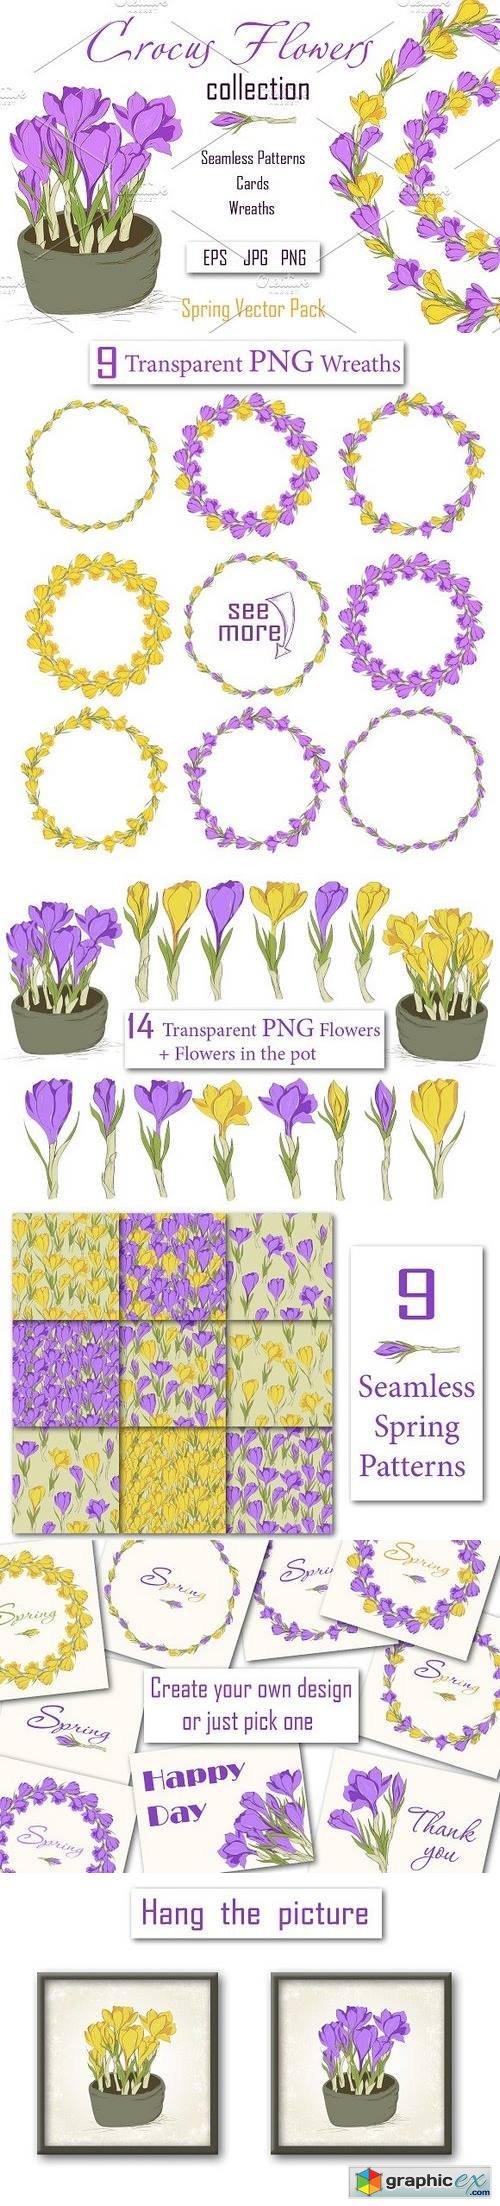 Crocus. Spring Flowers collection